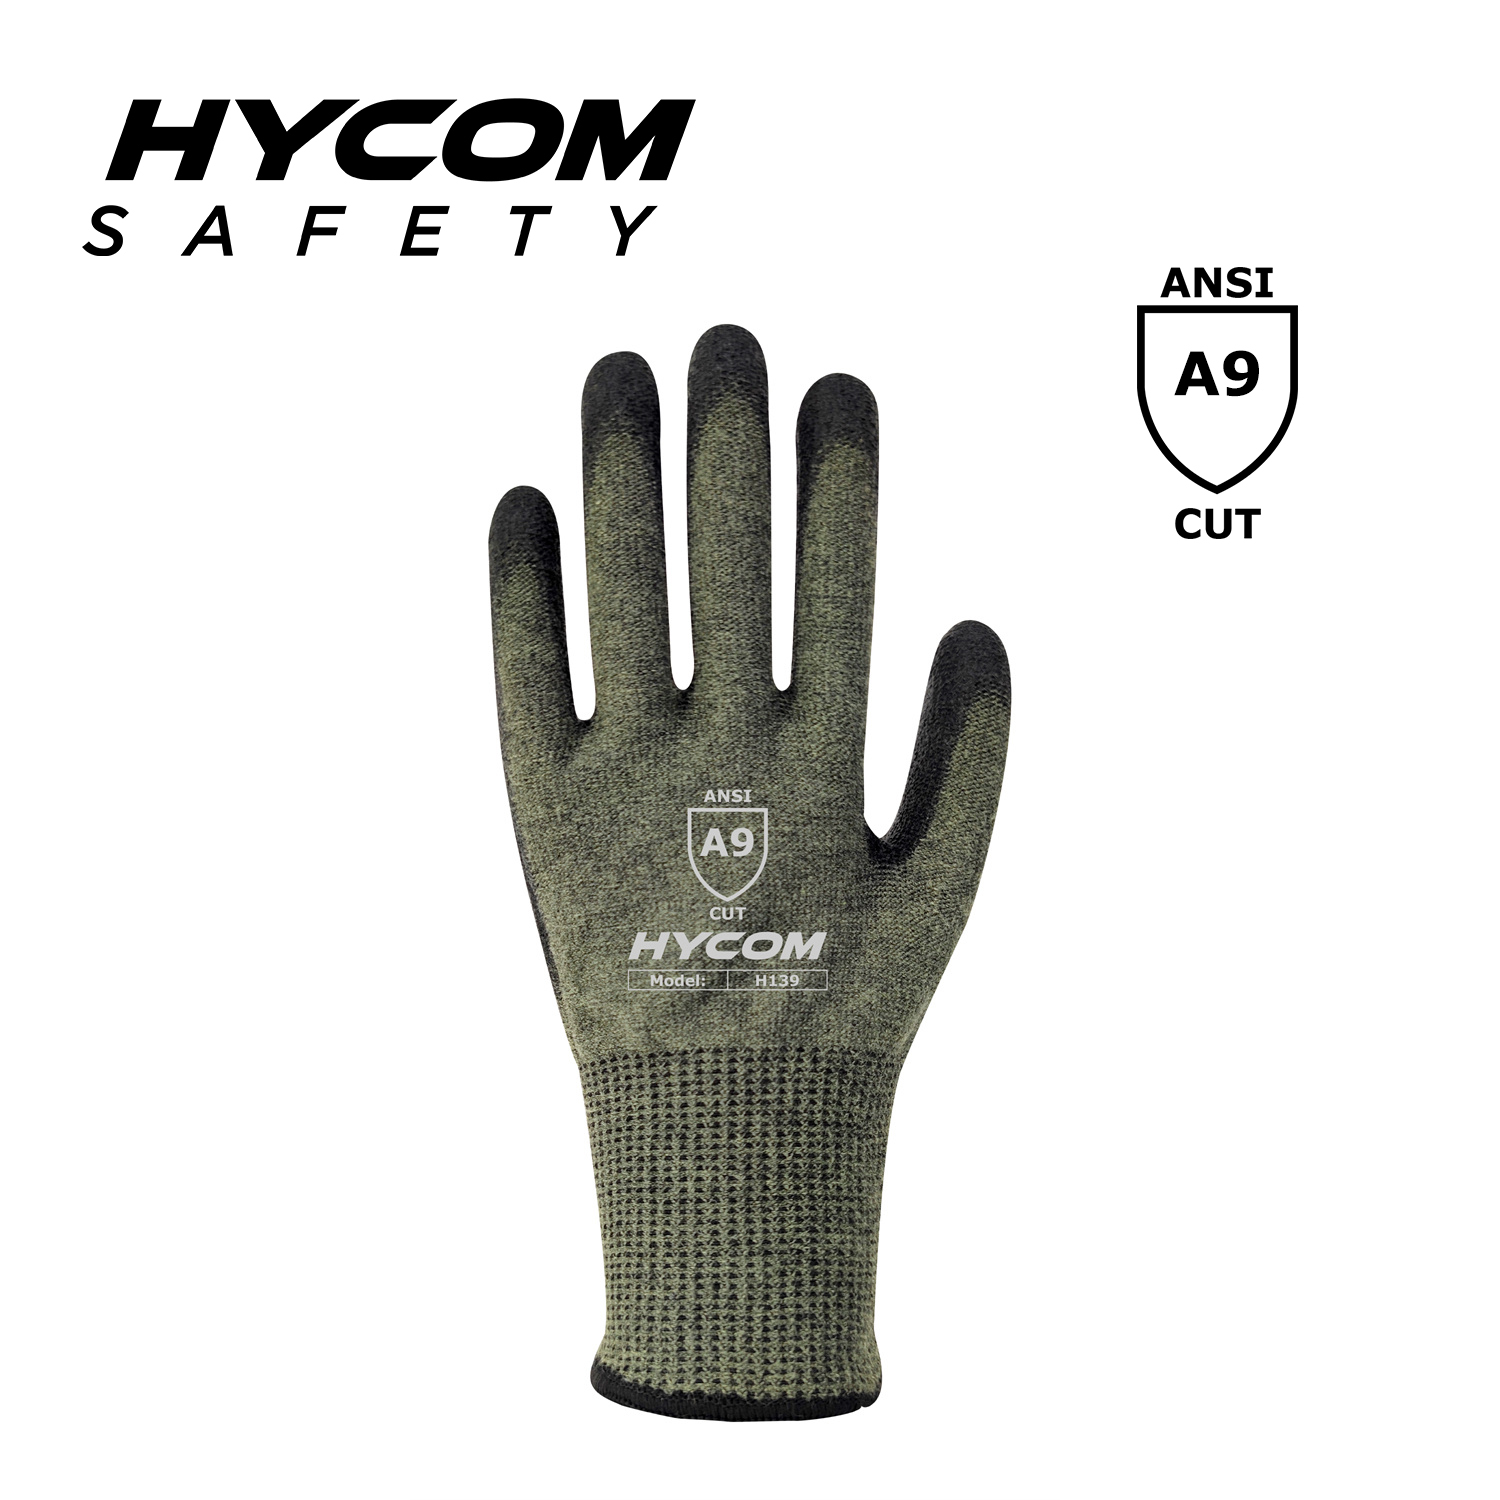 HYCOM 13G ANSI 9 Cut Resistant Glove with Palm PU Coating PPE Gloves